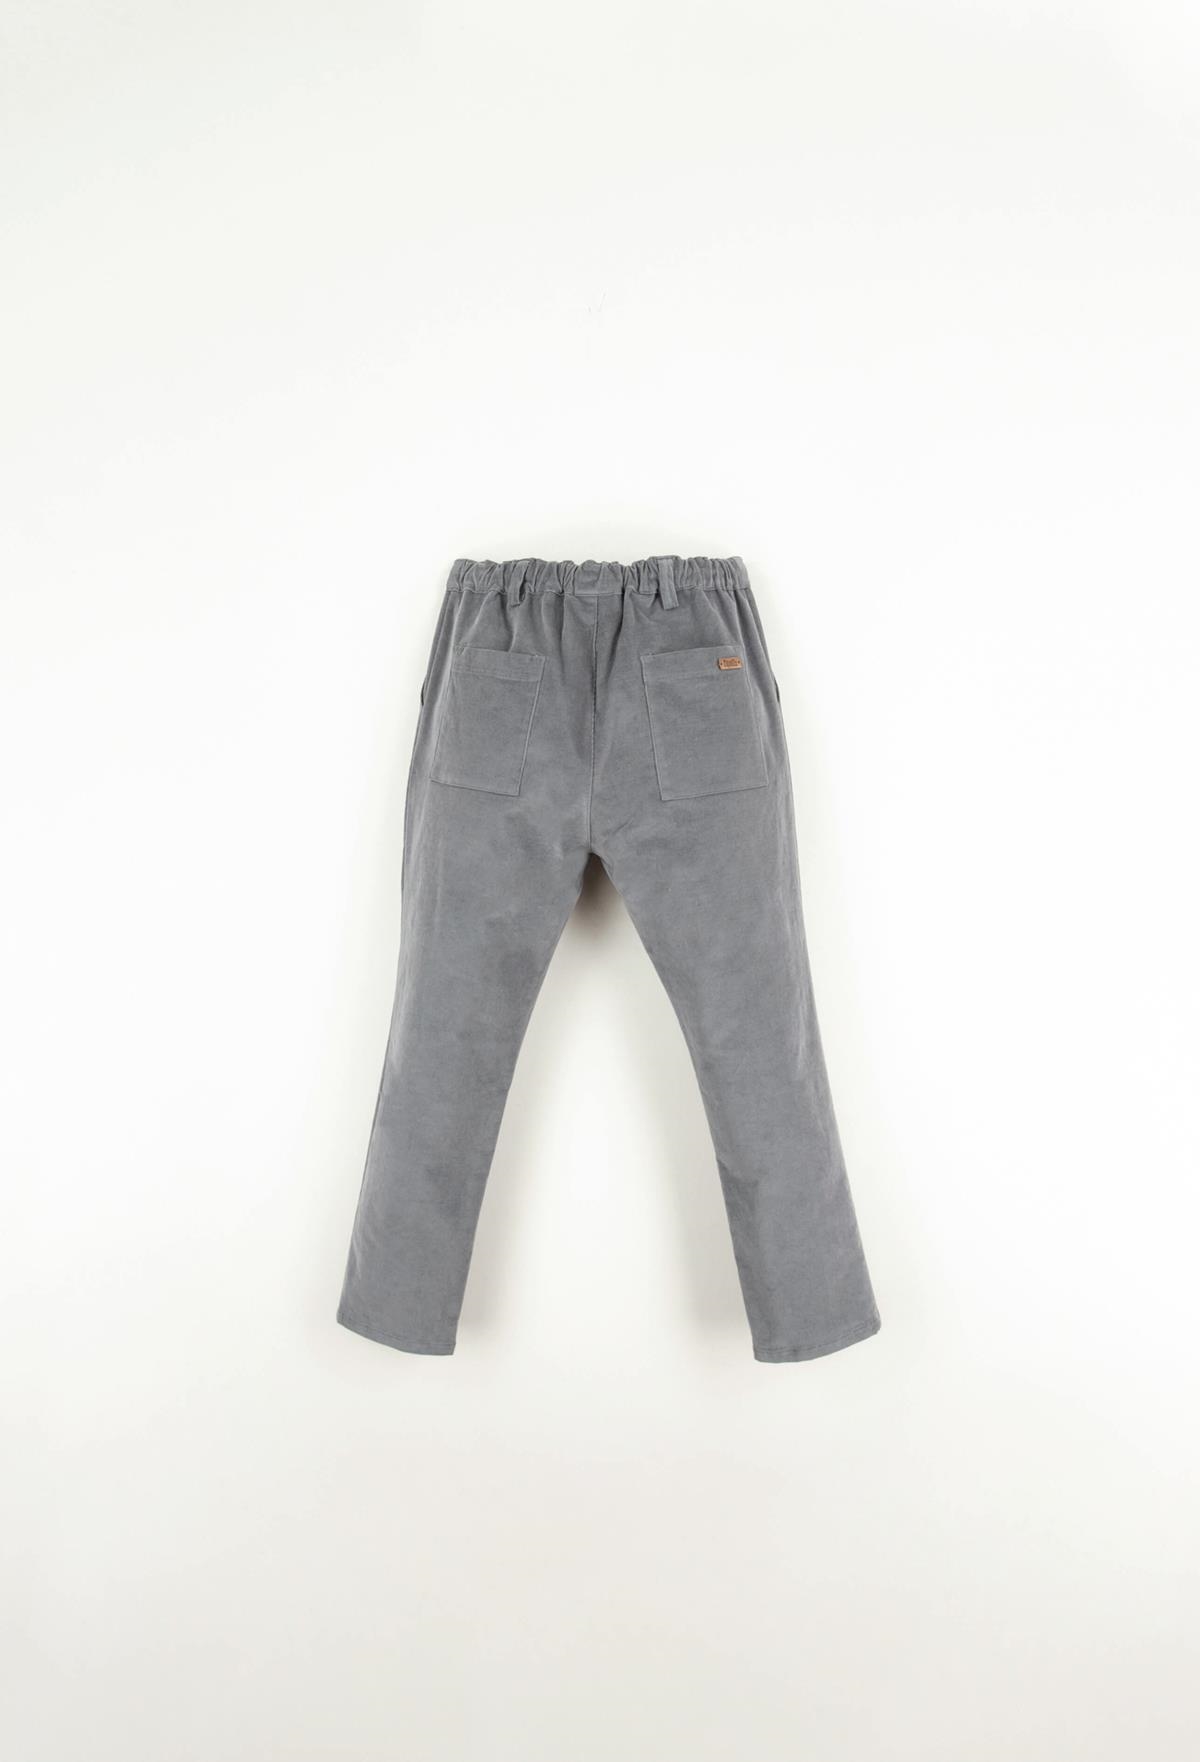 Mod.21.2 Grey trousers with placket | AW22.23 Mod.21.2 Grey trousers with placket